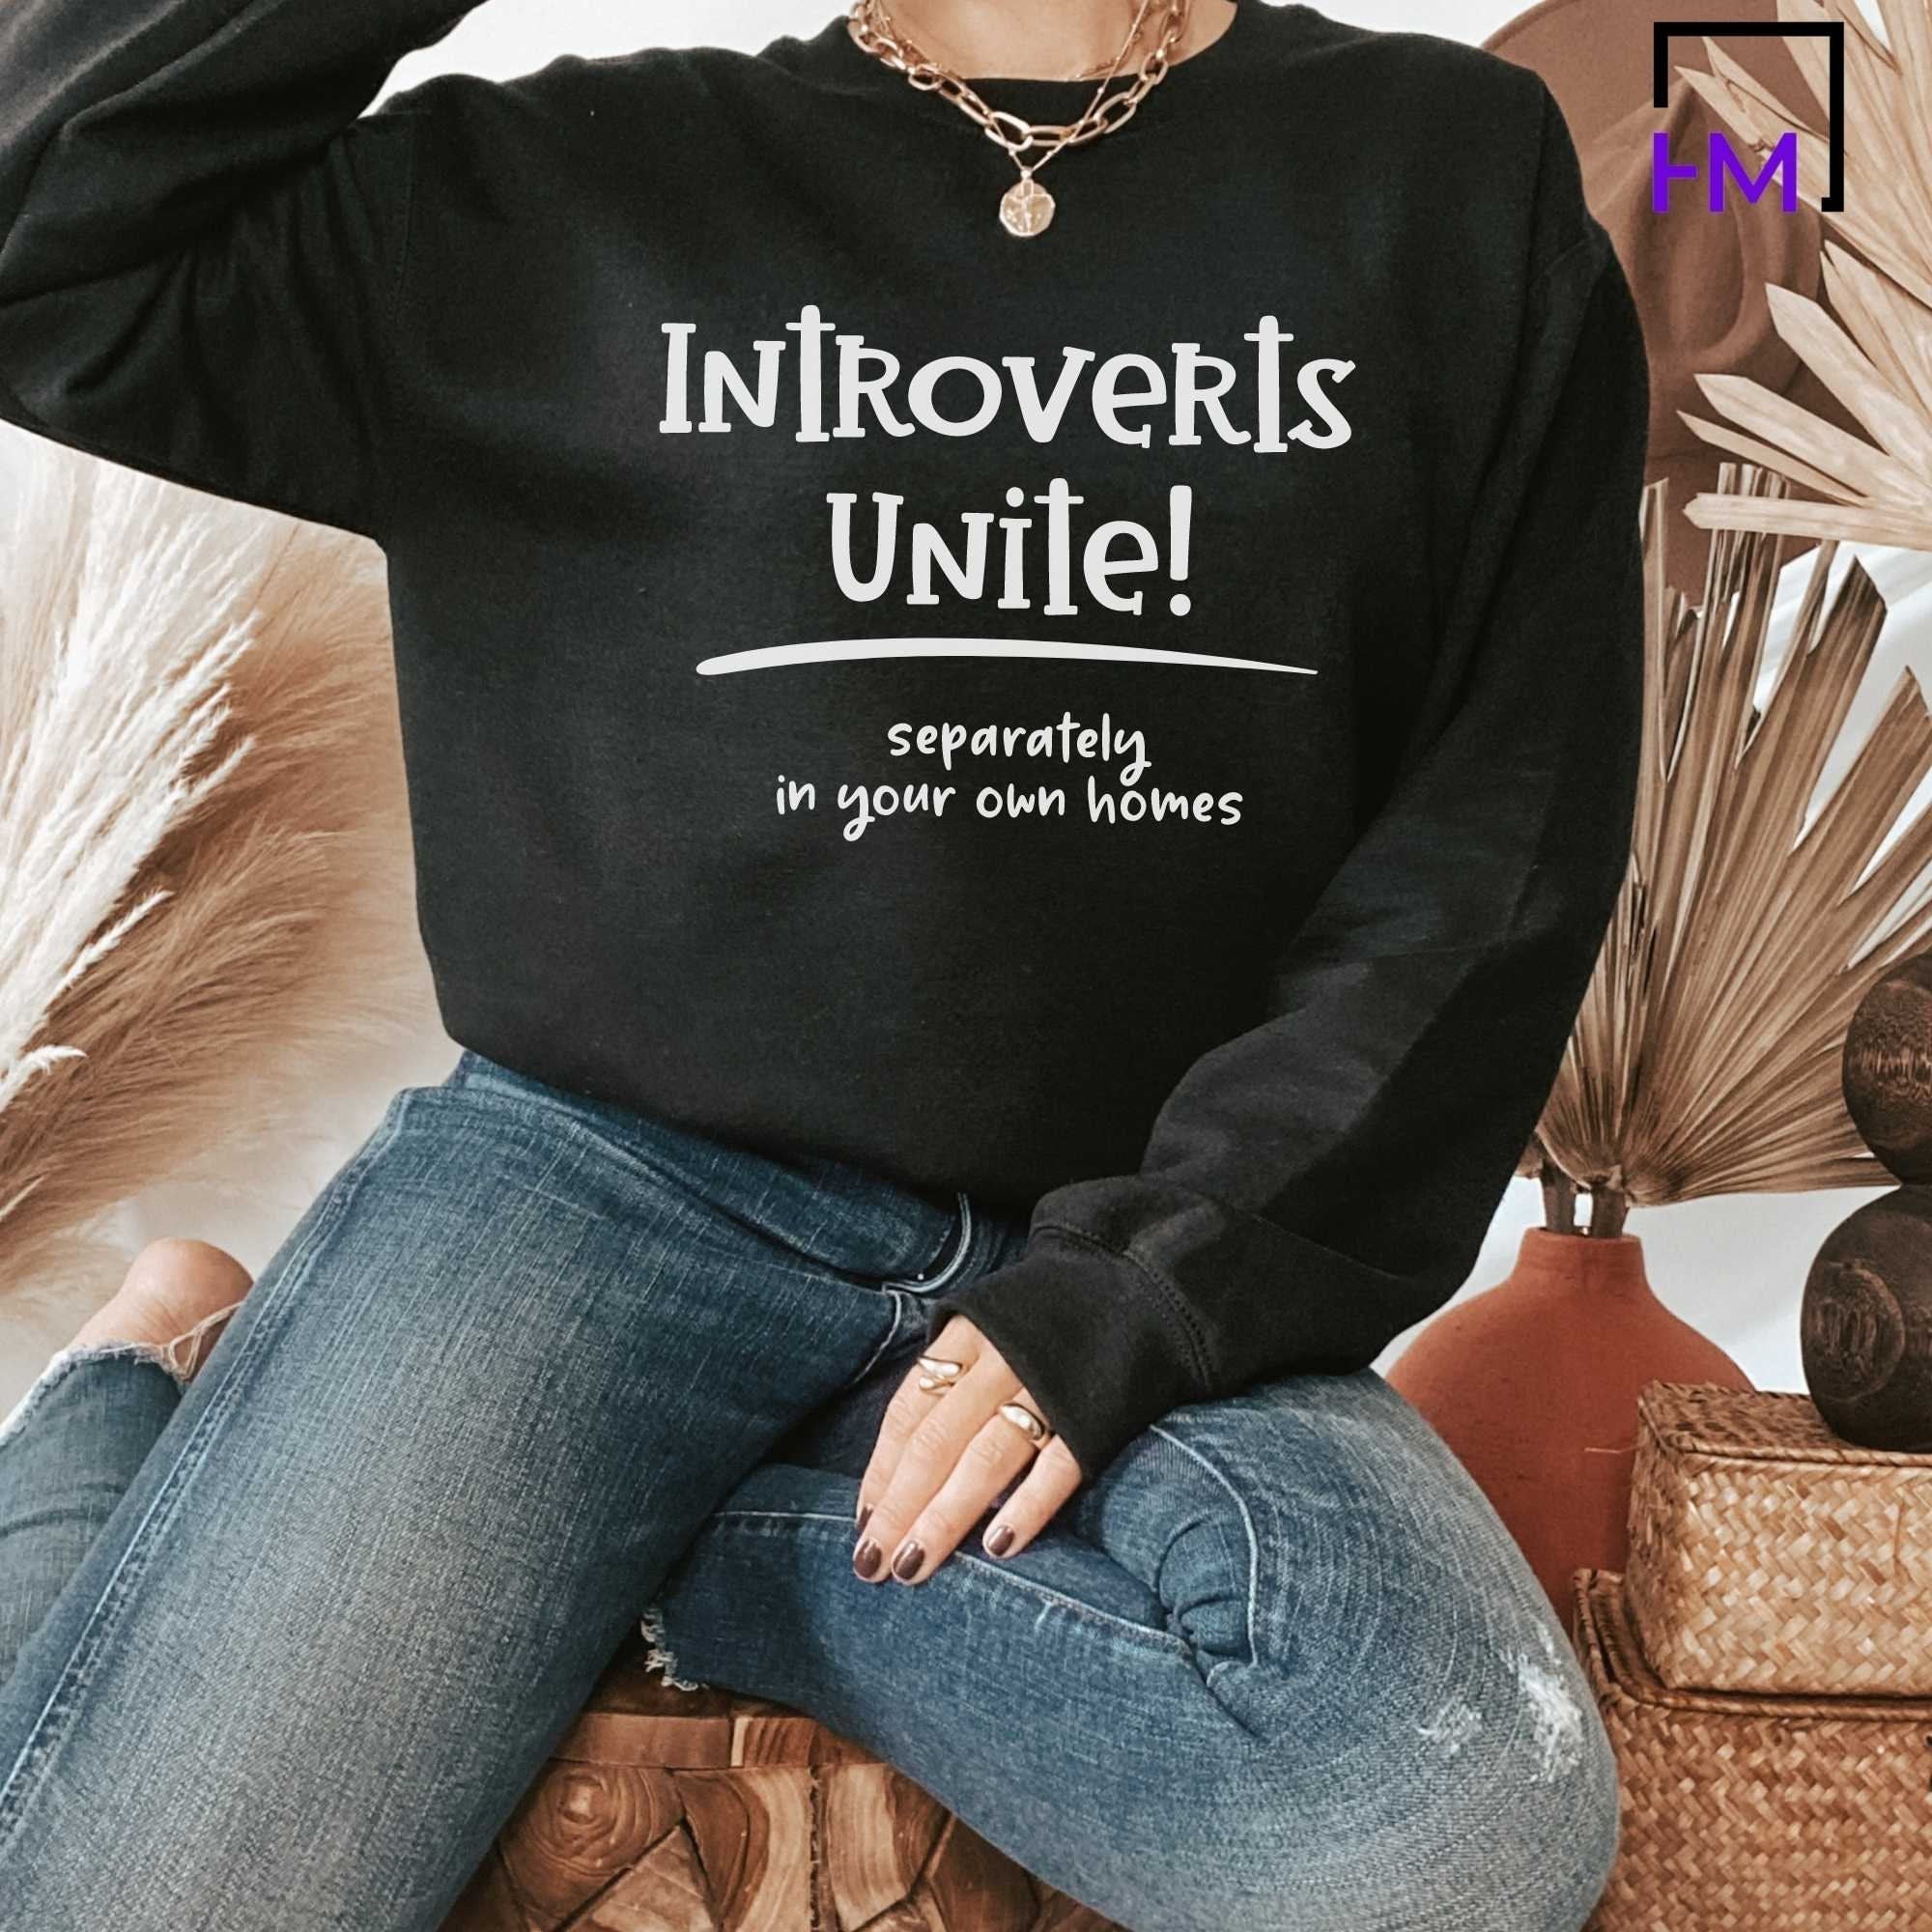 11 Gifts for Introverts: The Go-To Guide carefully curated by an introvert!